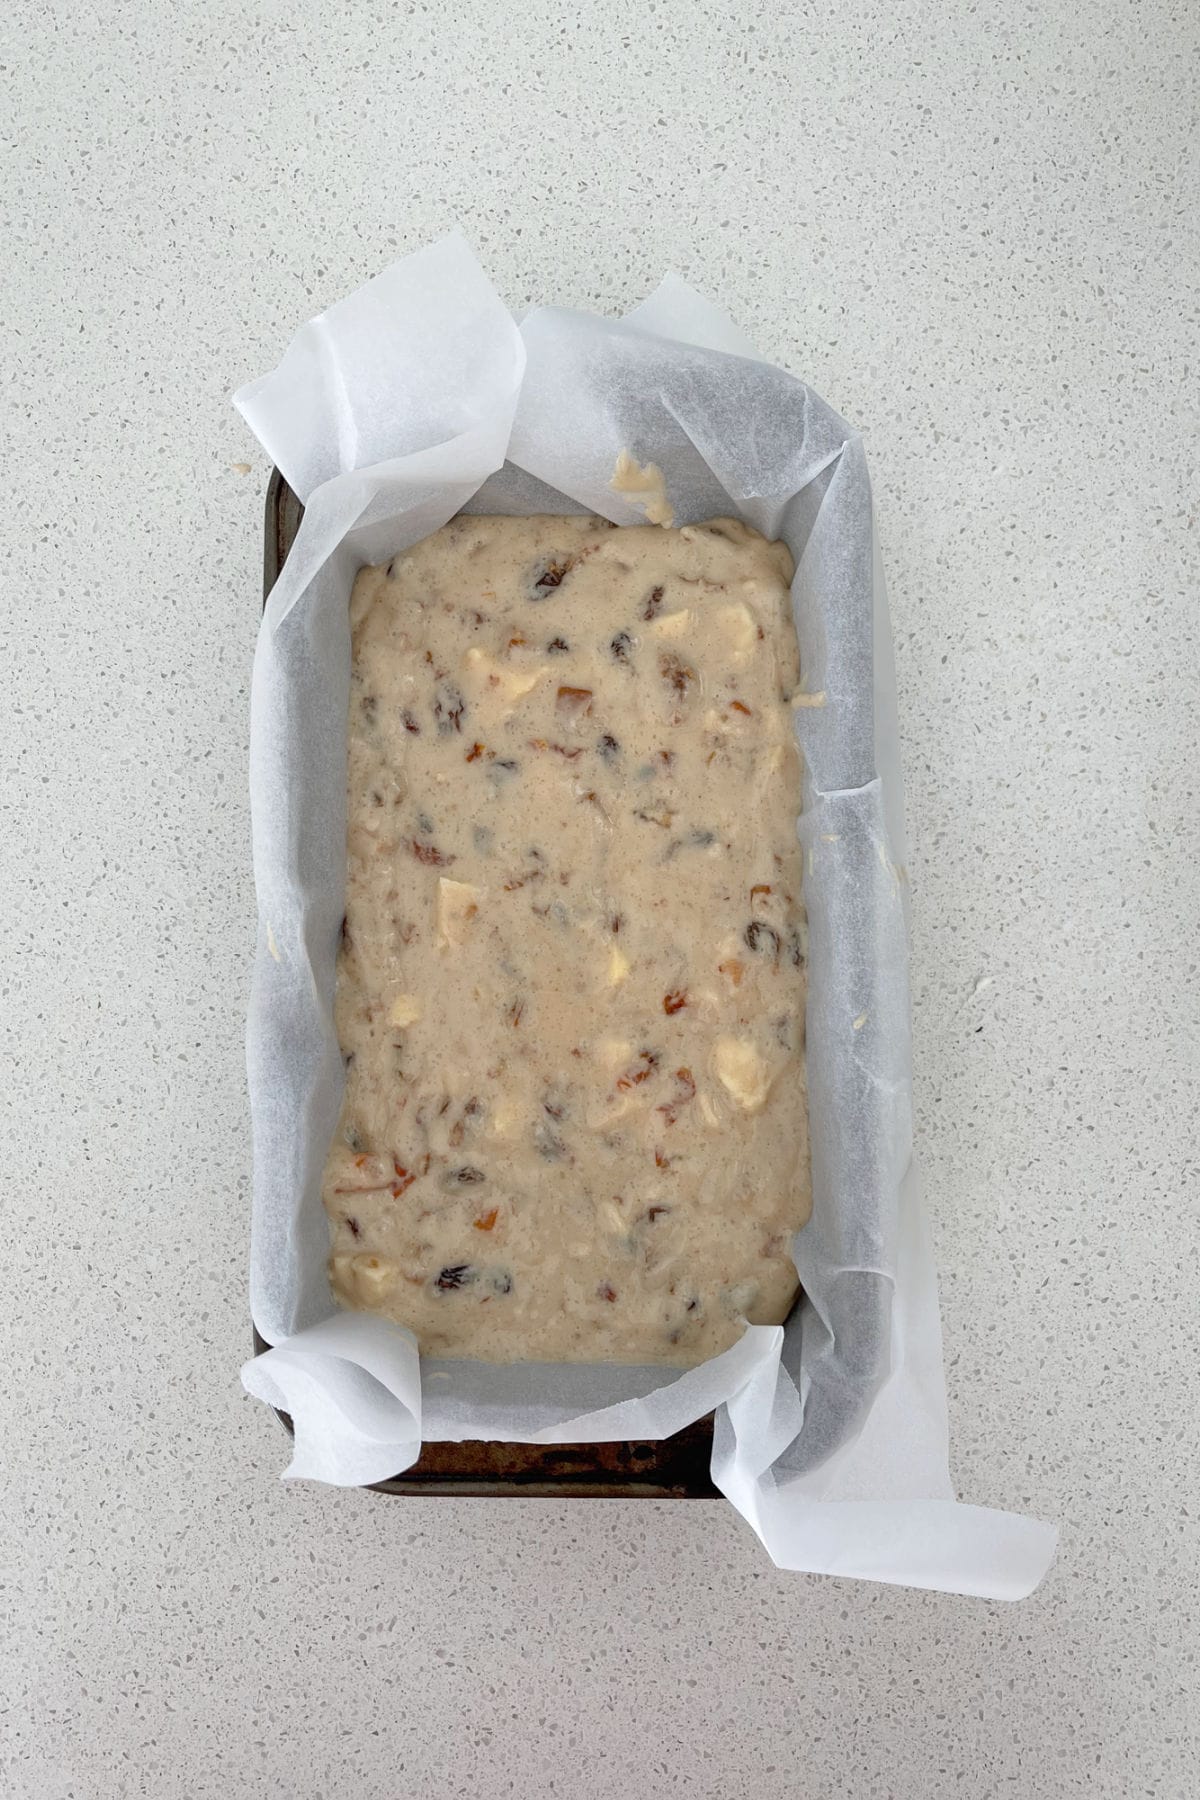 Thermomix Fruit Loaf batter in a baking dish ready to go into the oven.